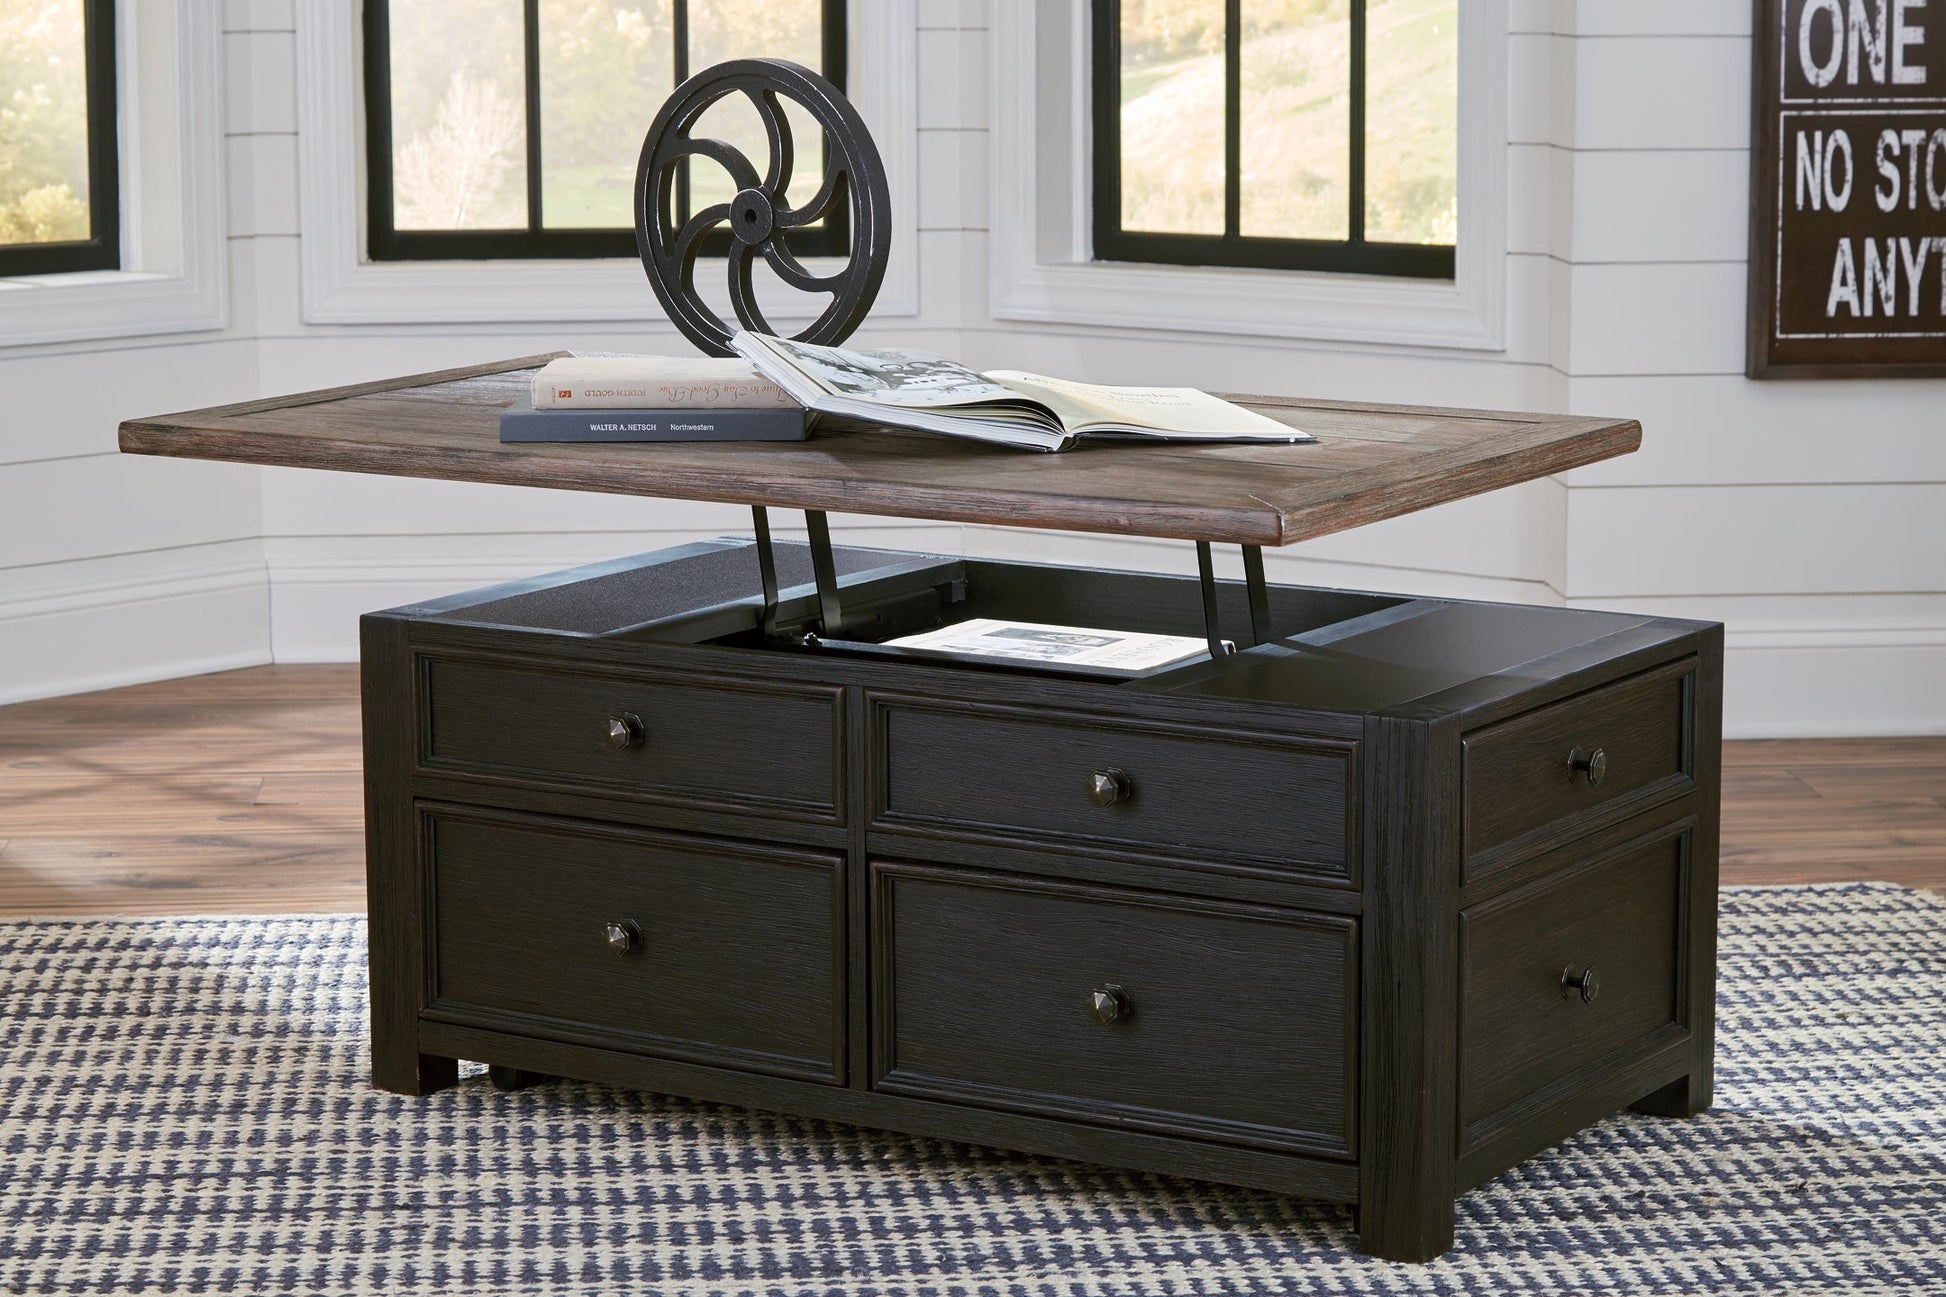 Tyler Creek Coffee Table with 1 End Table Rent Wise Rent To Own Jacksonville, Florida